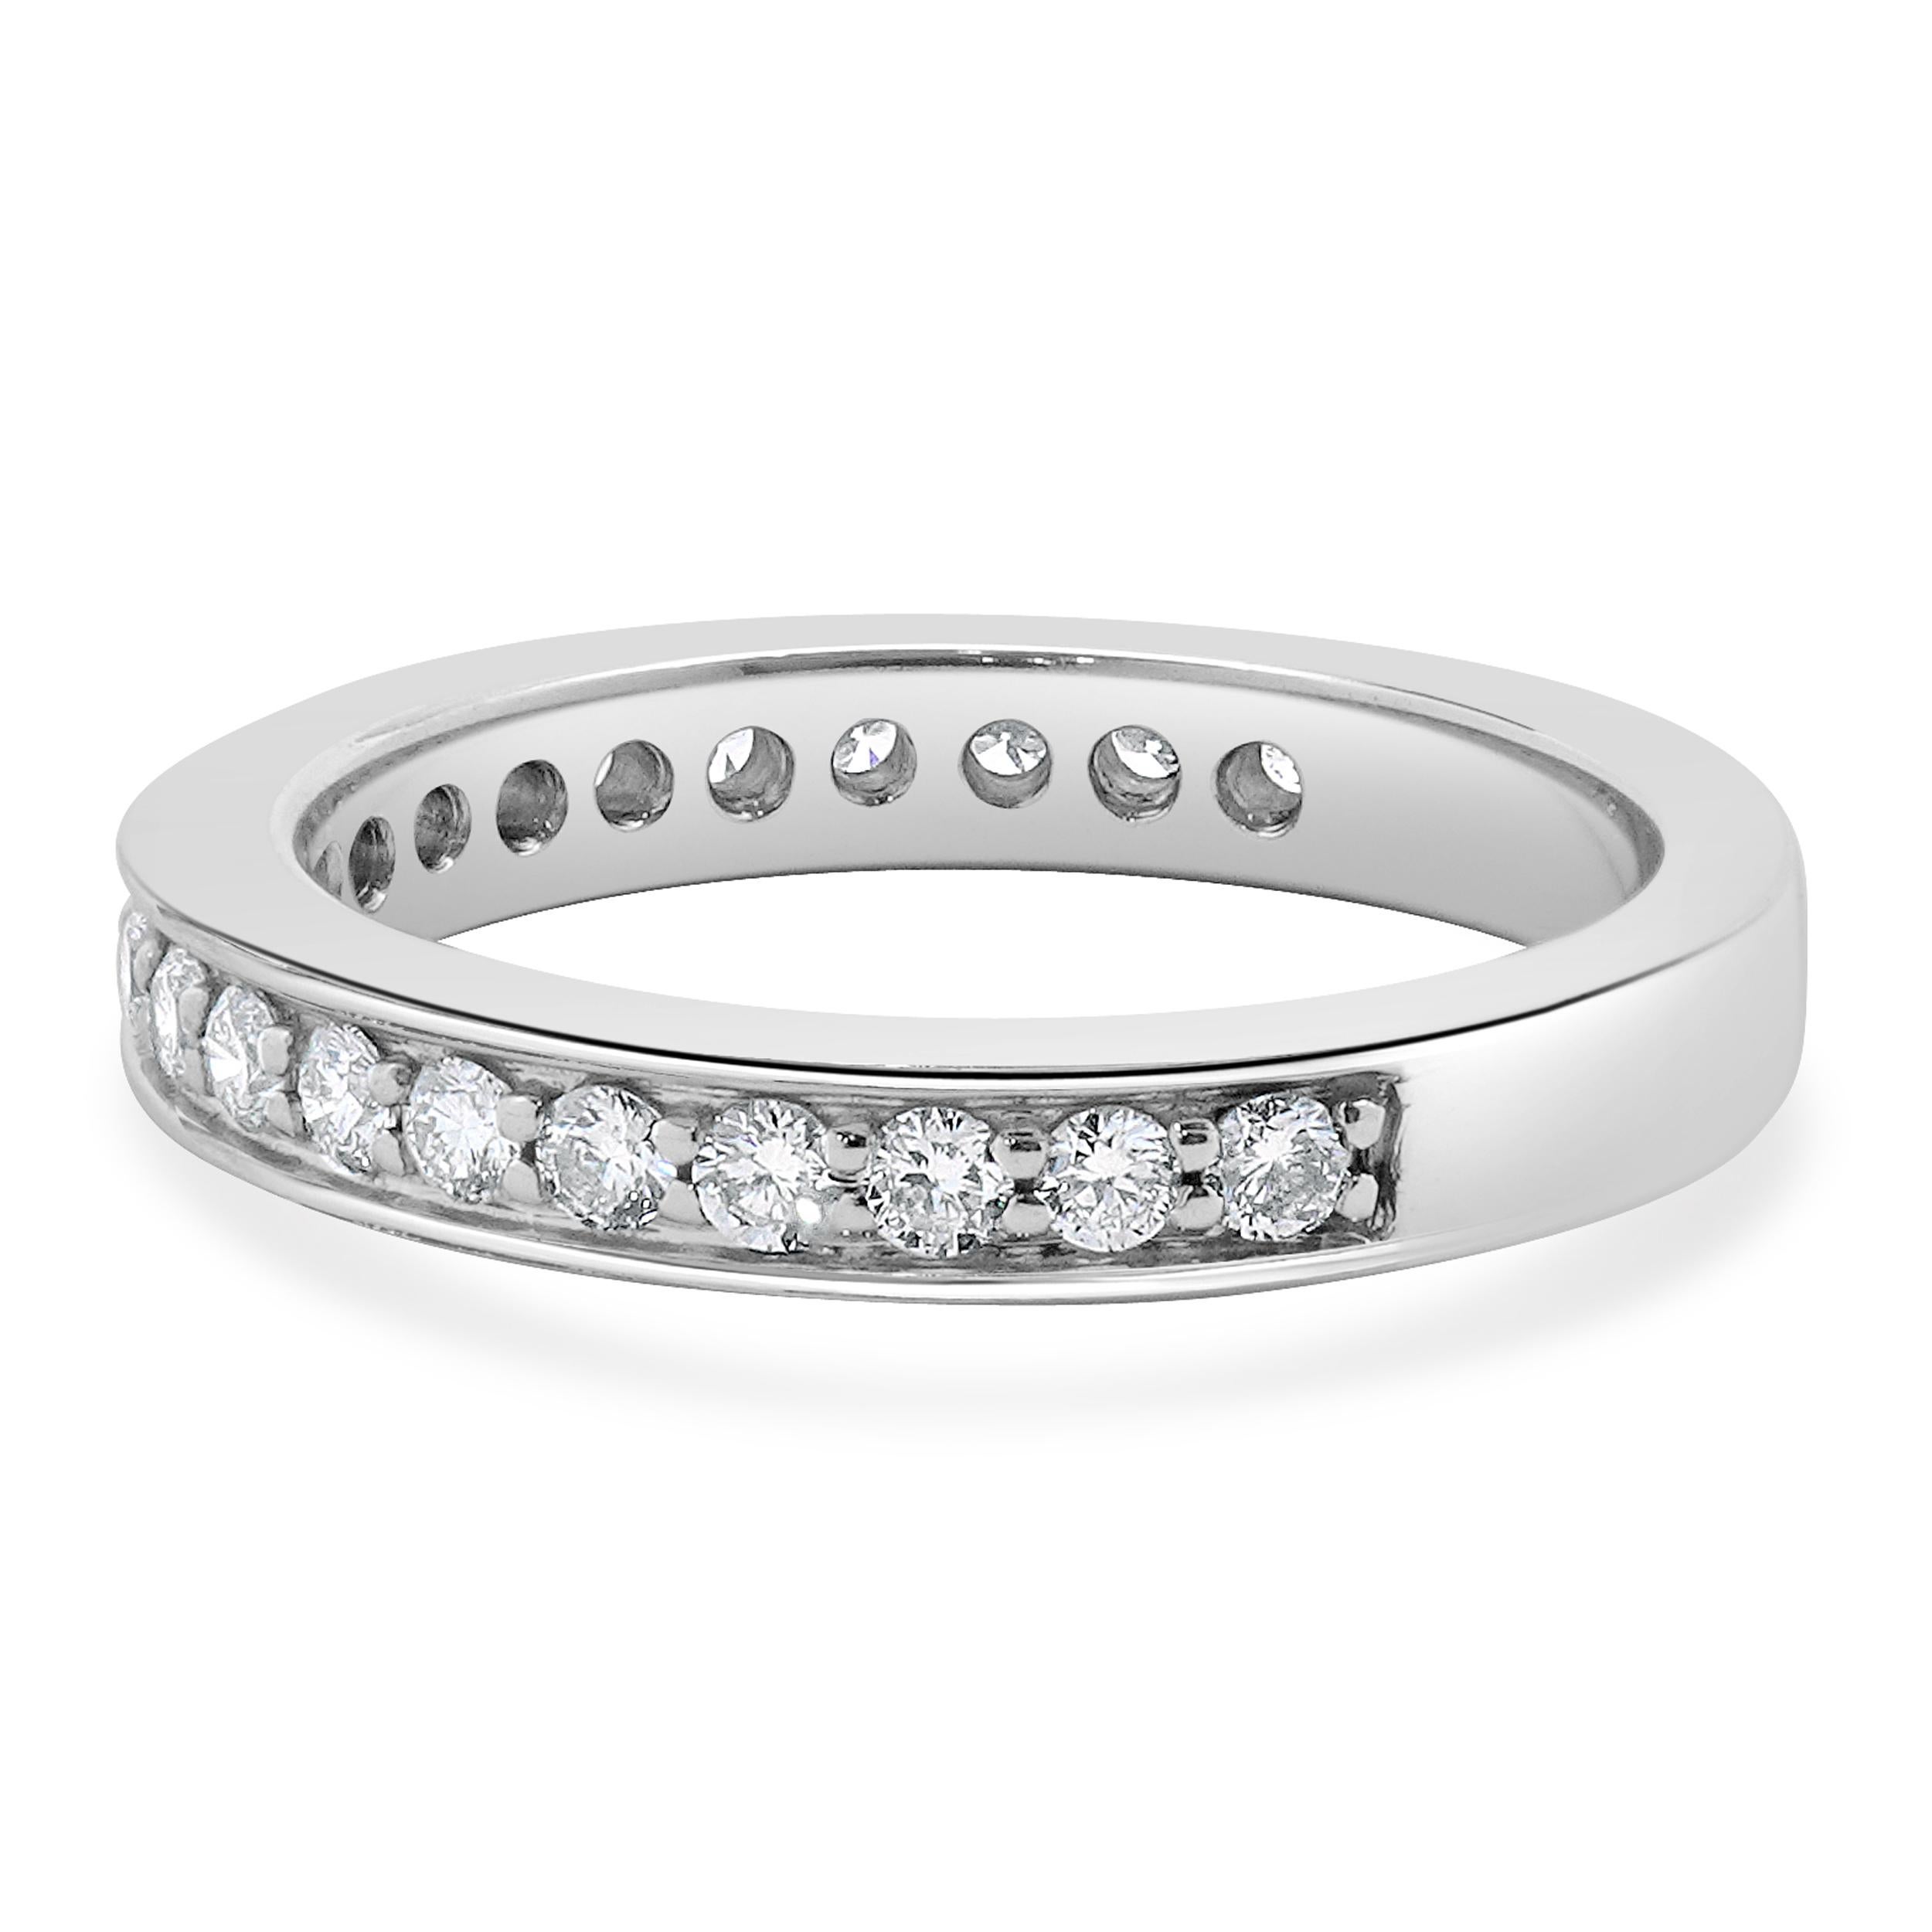 Designer: Custom
Material: 14K white gold
Diamonds: 21 round brilliant cut = 0.52cttw
Color: H / I
Clarity: SI1
Size: 5.5 sizing available 
Dimensions: ring top measures 3mm in width
Weight: 3.62 grams
